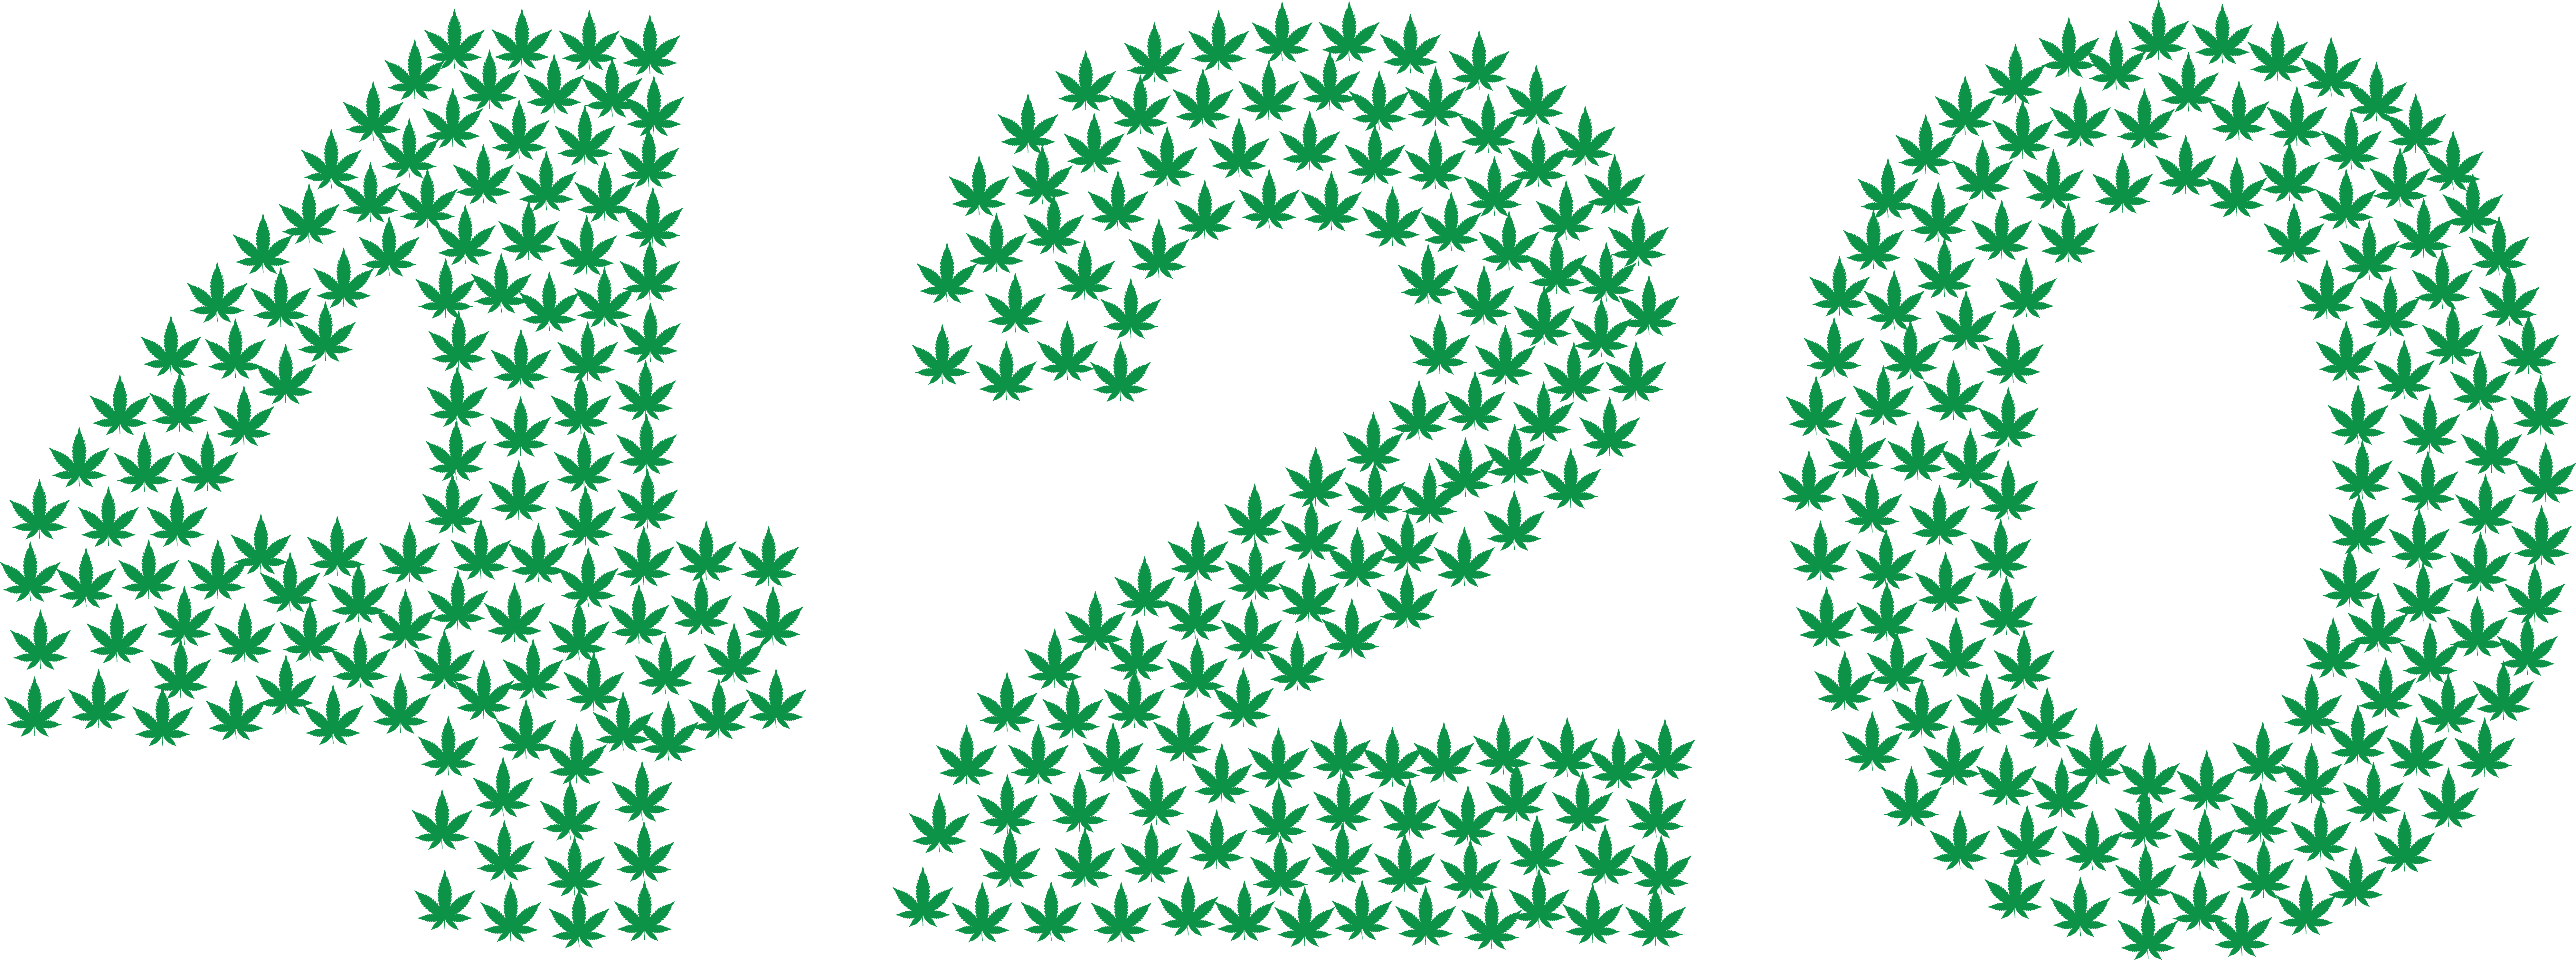 Free Clipart of a 420 design made of green Pot Leaves.